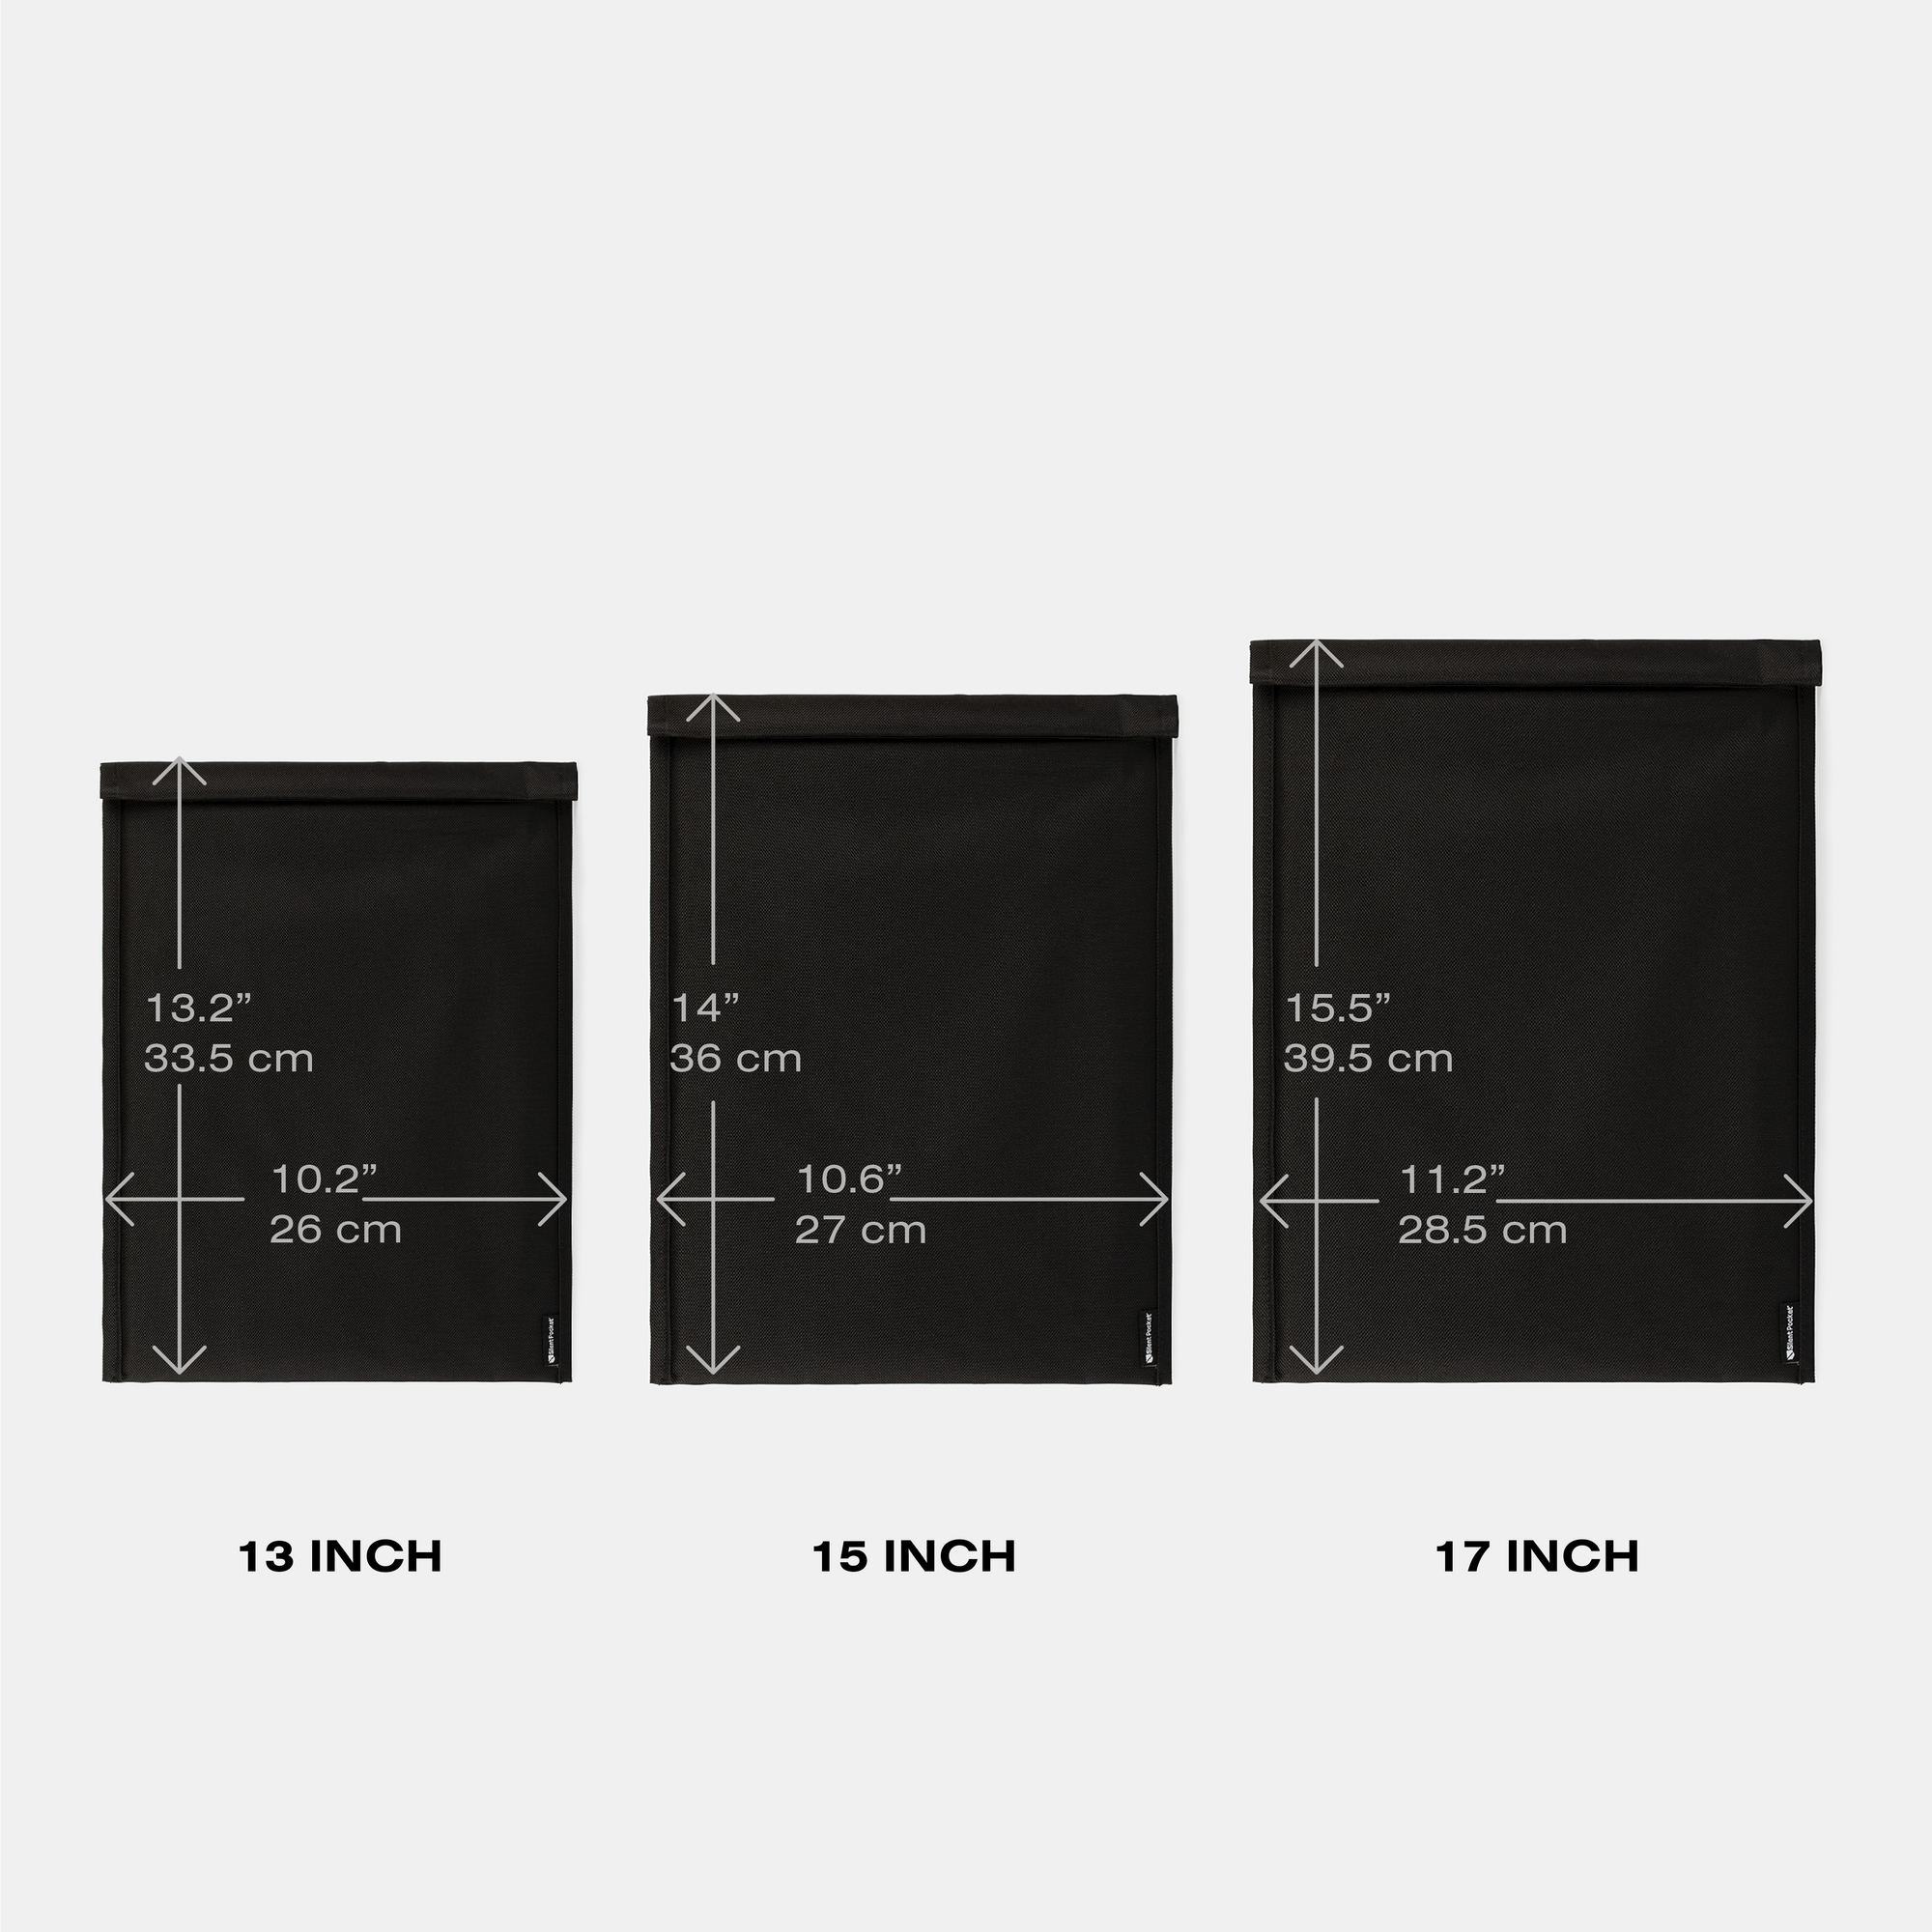 faraday bags for laptop sizes